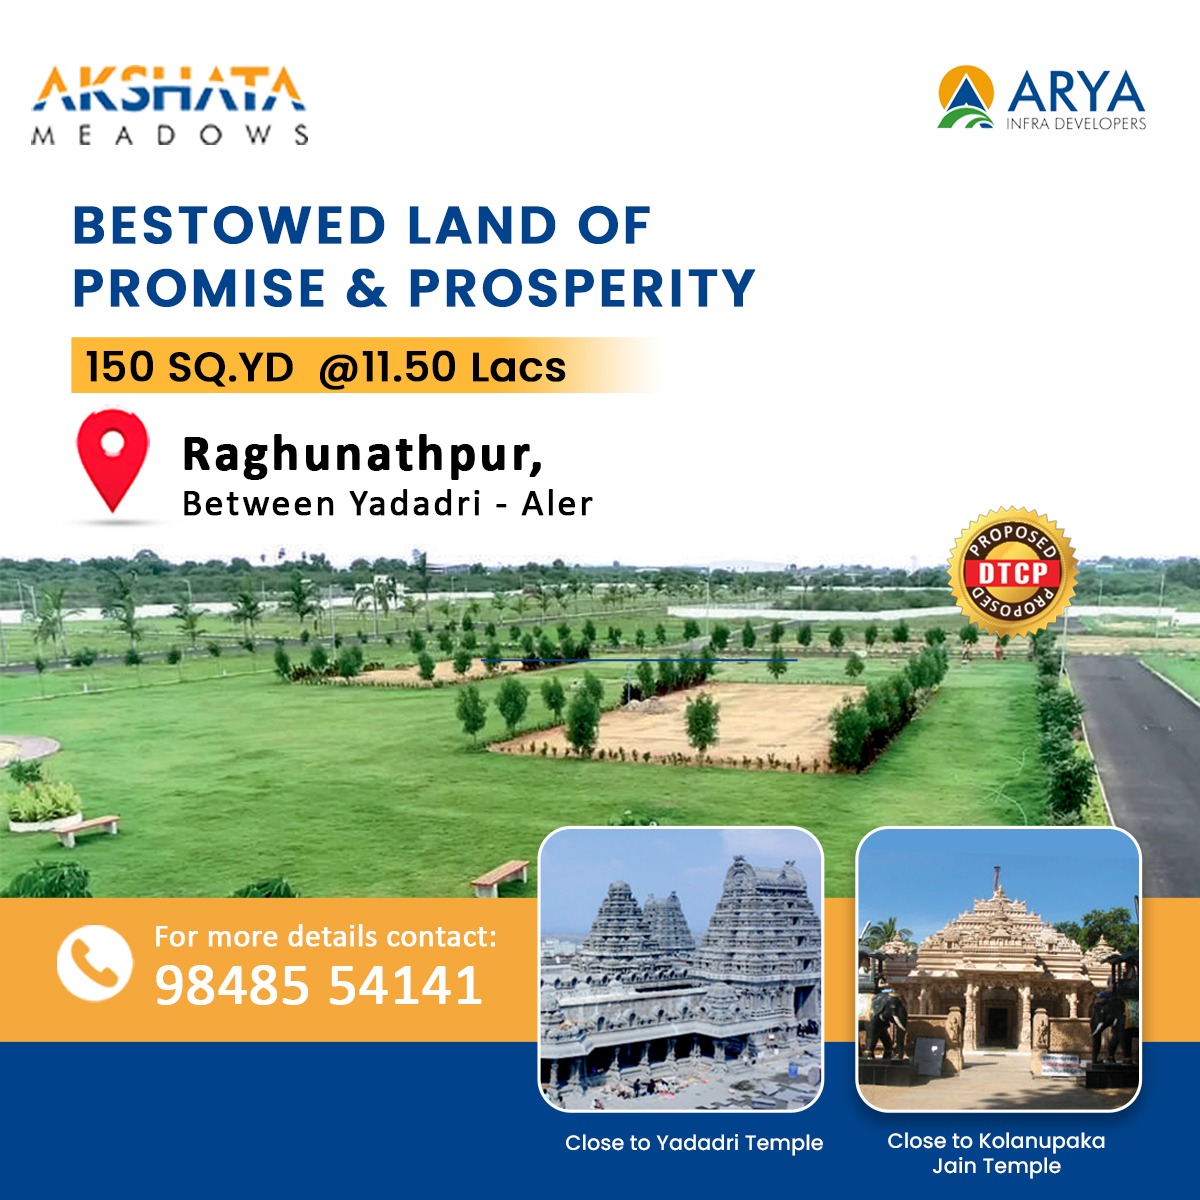 Akshata Meadows Open plots for Sale at Raghunathpur Arya Infra in Hyderabad.Real EstateLand Plot For SaleAll Indiaother